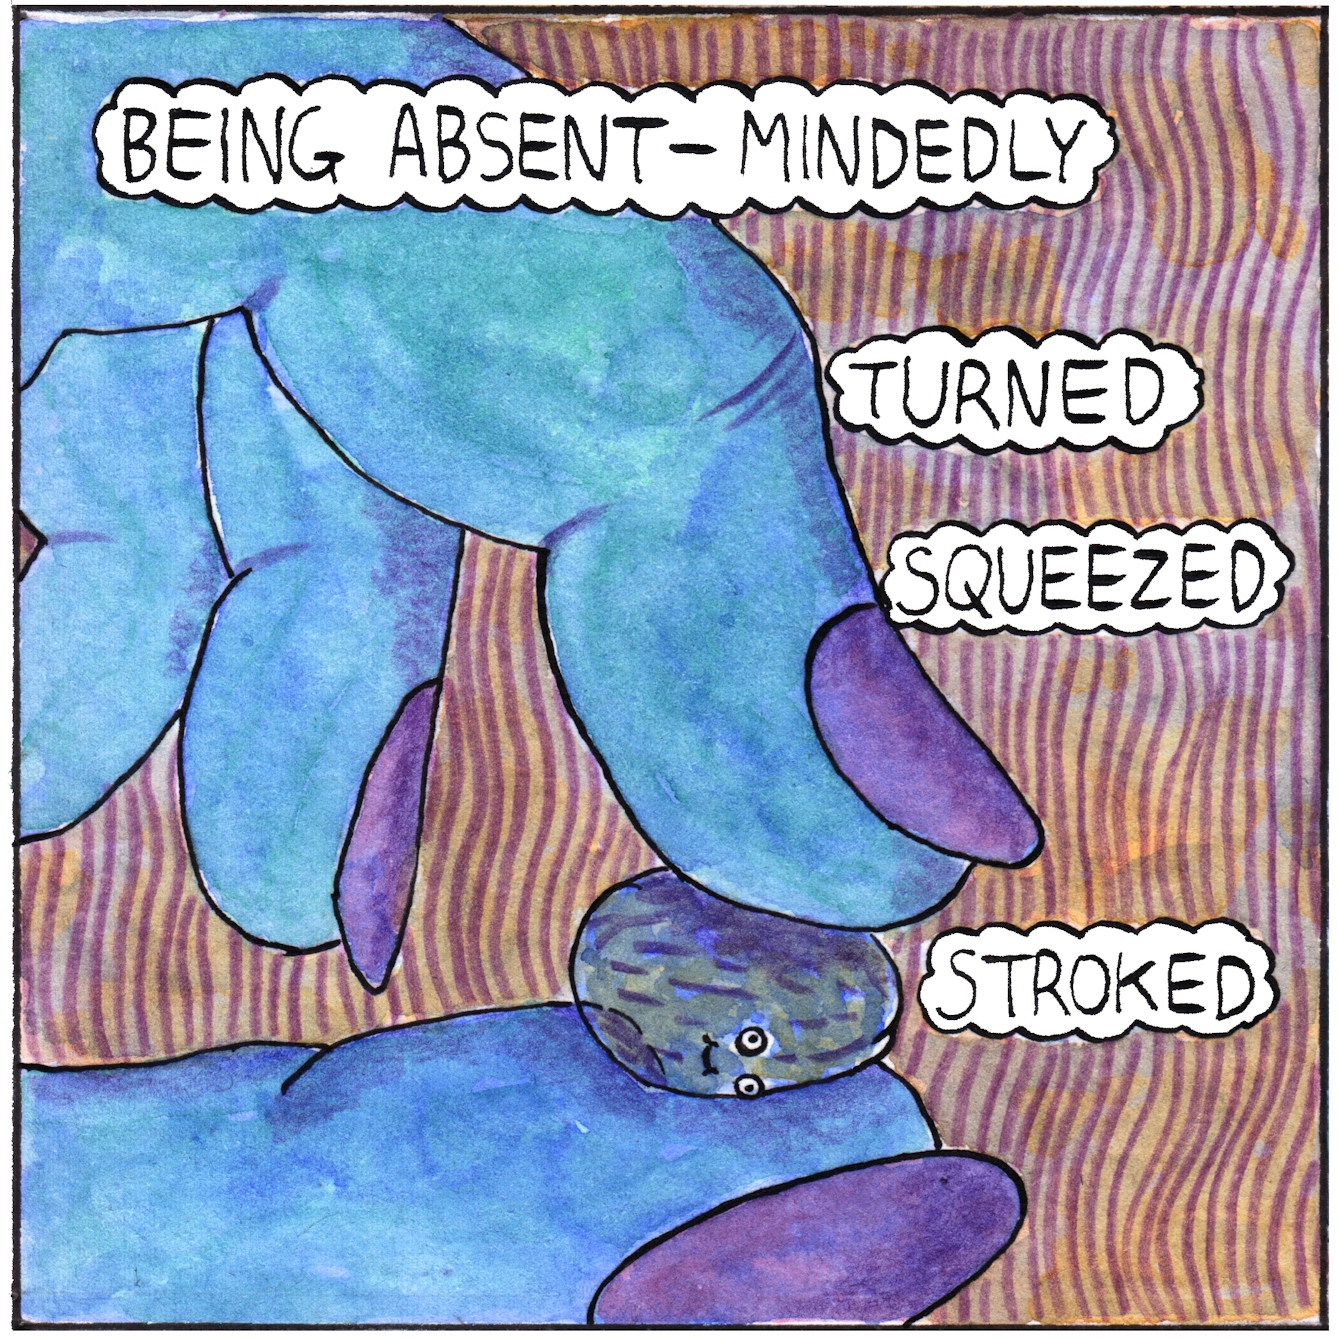 Panel 3 of the web comic 'Nutmeg': A huge blue hand with pink fingernails is rolling the smiling nutmeg, which still smiles, between forefinger and thumb. Text bubbles read “Being absent-mindedly turned, squeezed, stroked”. 